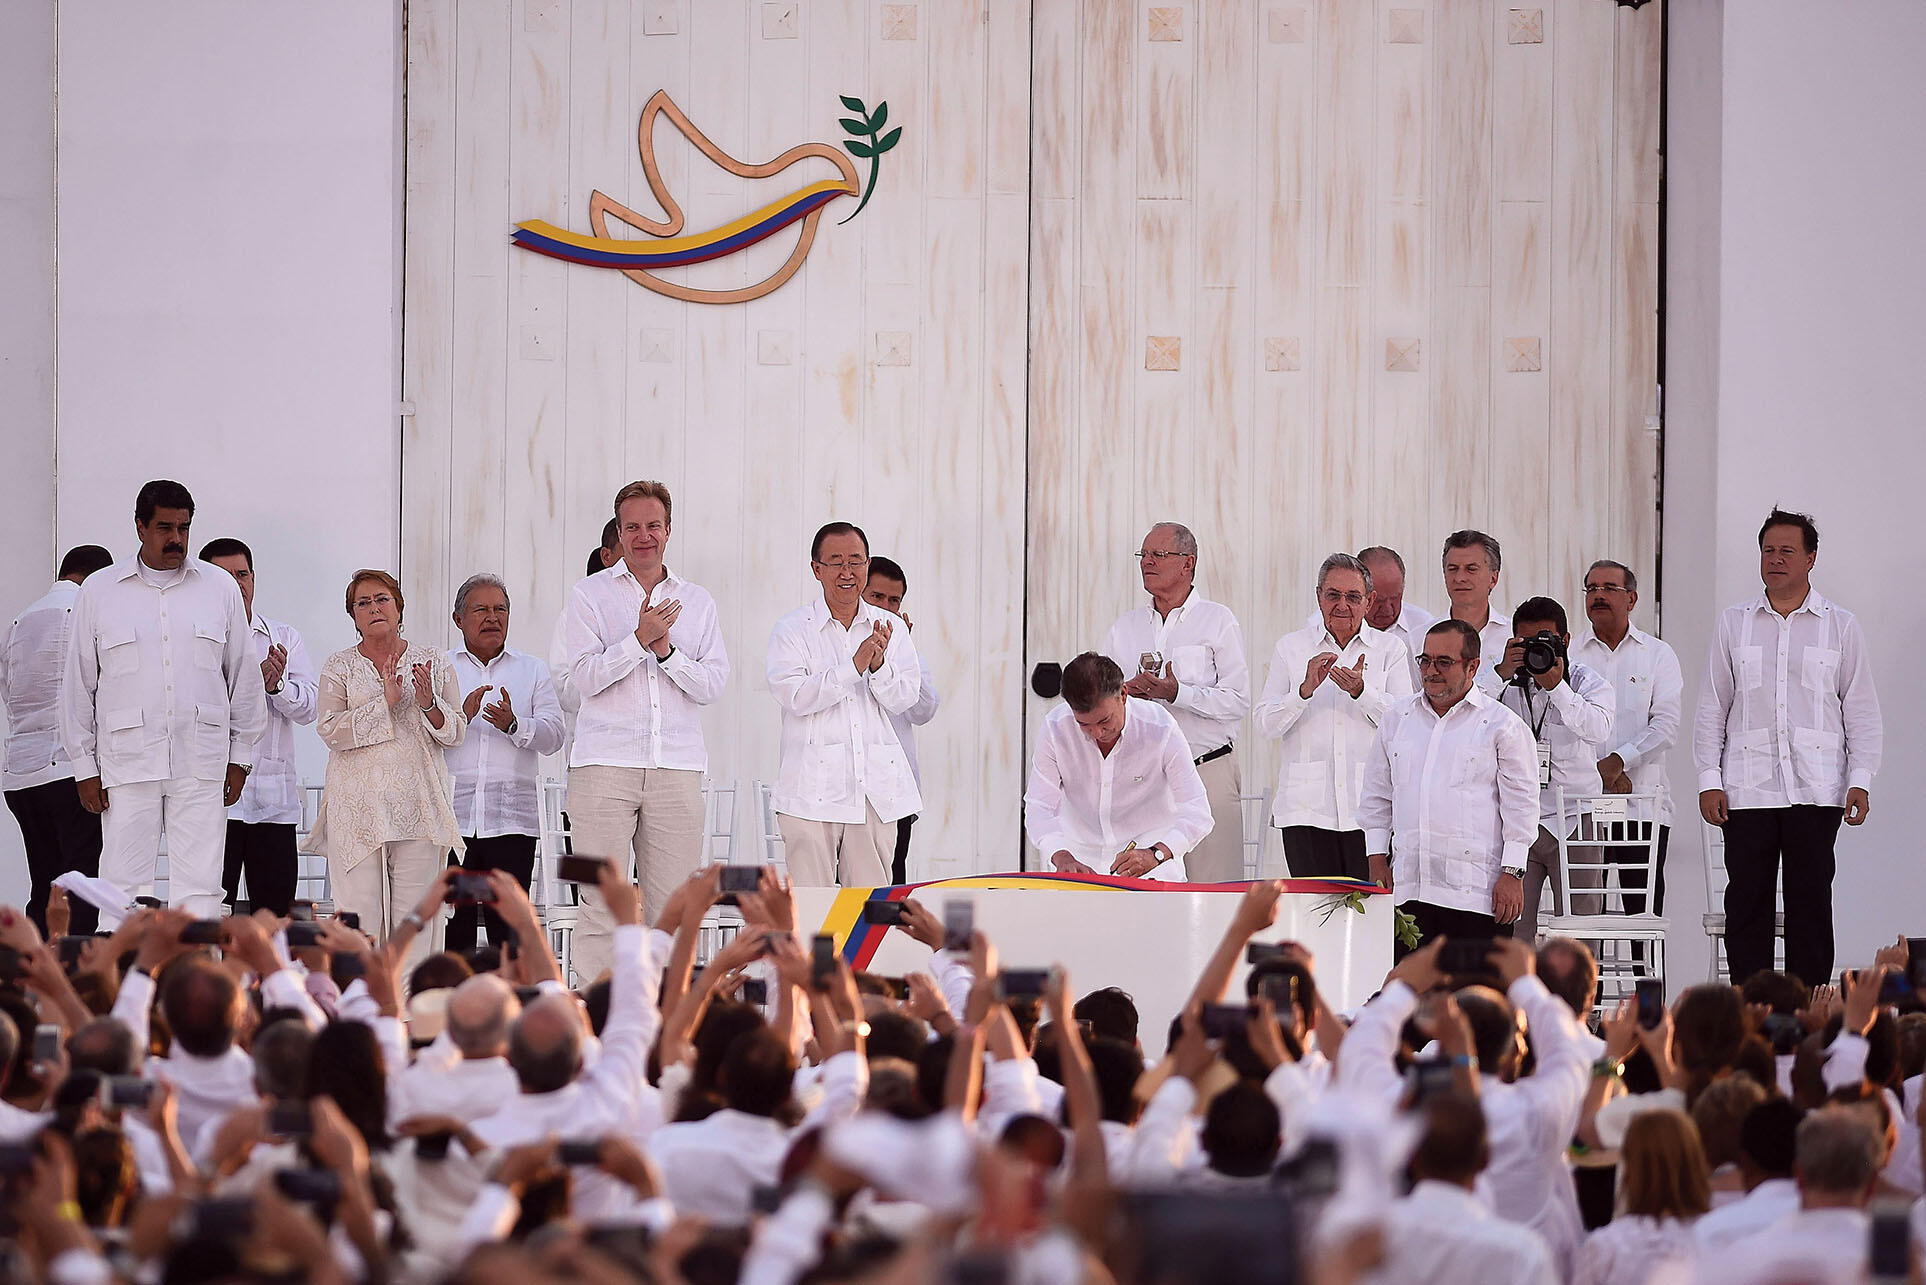 Latin American presidents on a stage to celebrate the 2016 signing of the initial peace accord in Colombia. (Photo by Ximena Navarro/presidencia.cl.)